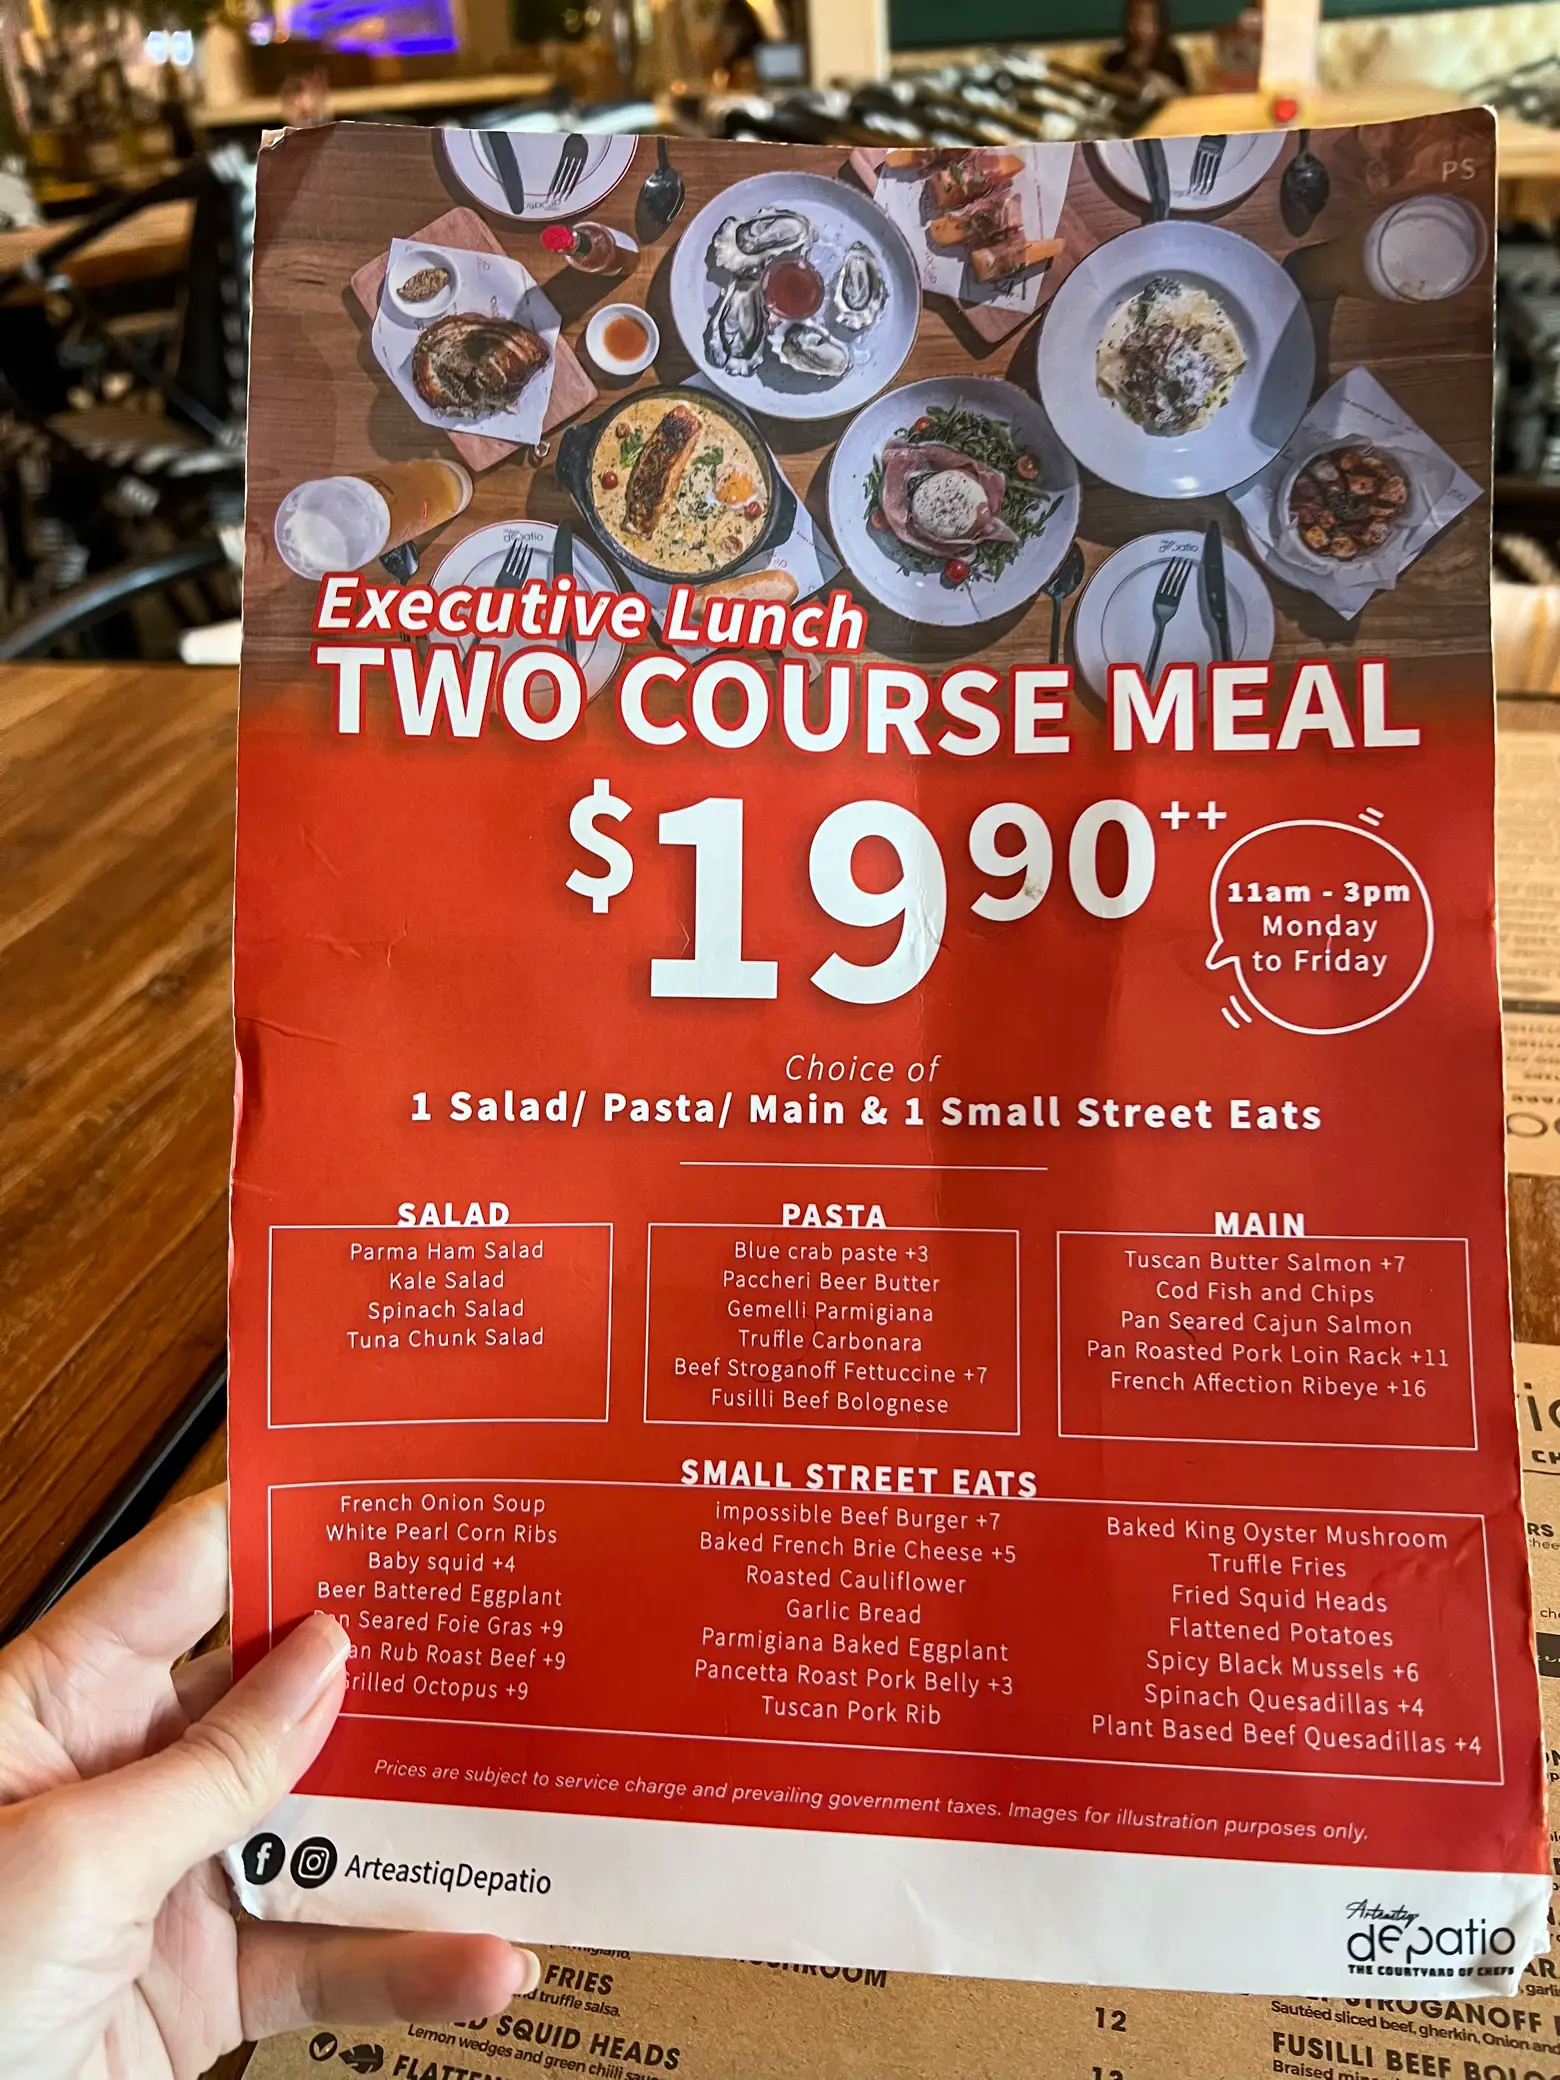 Discounted meal sets